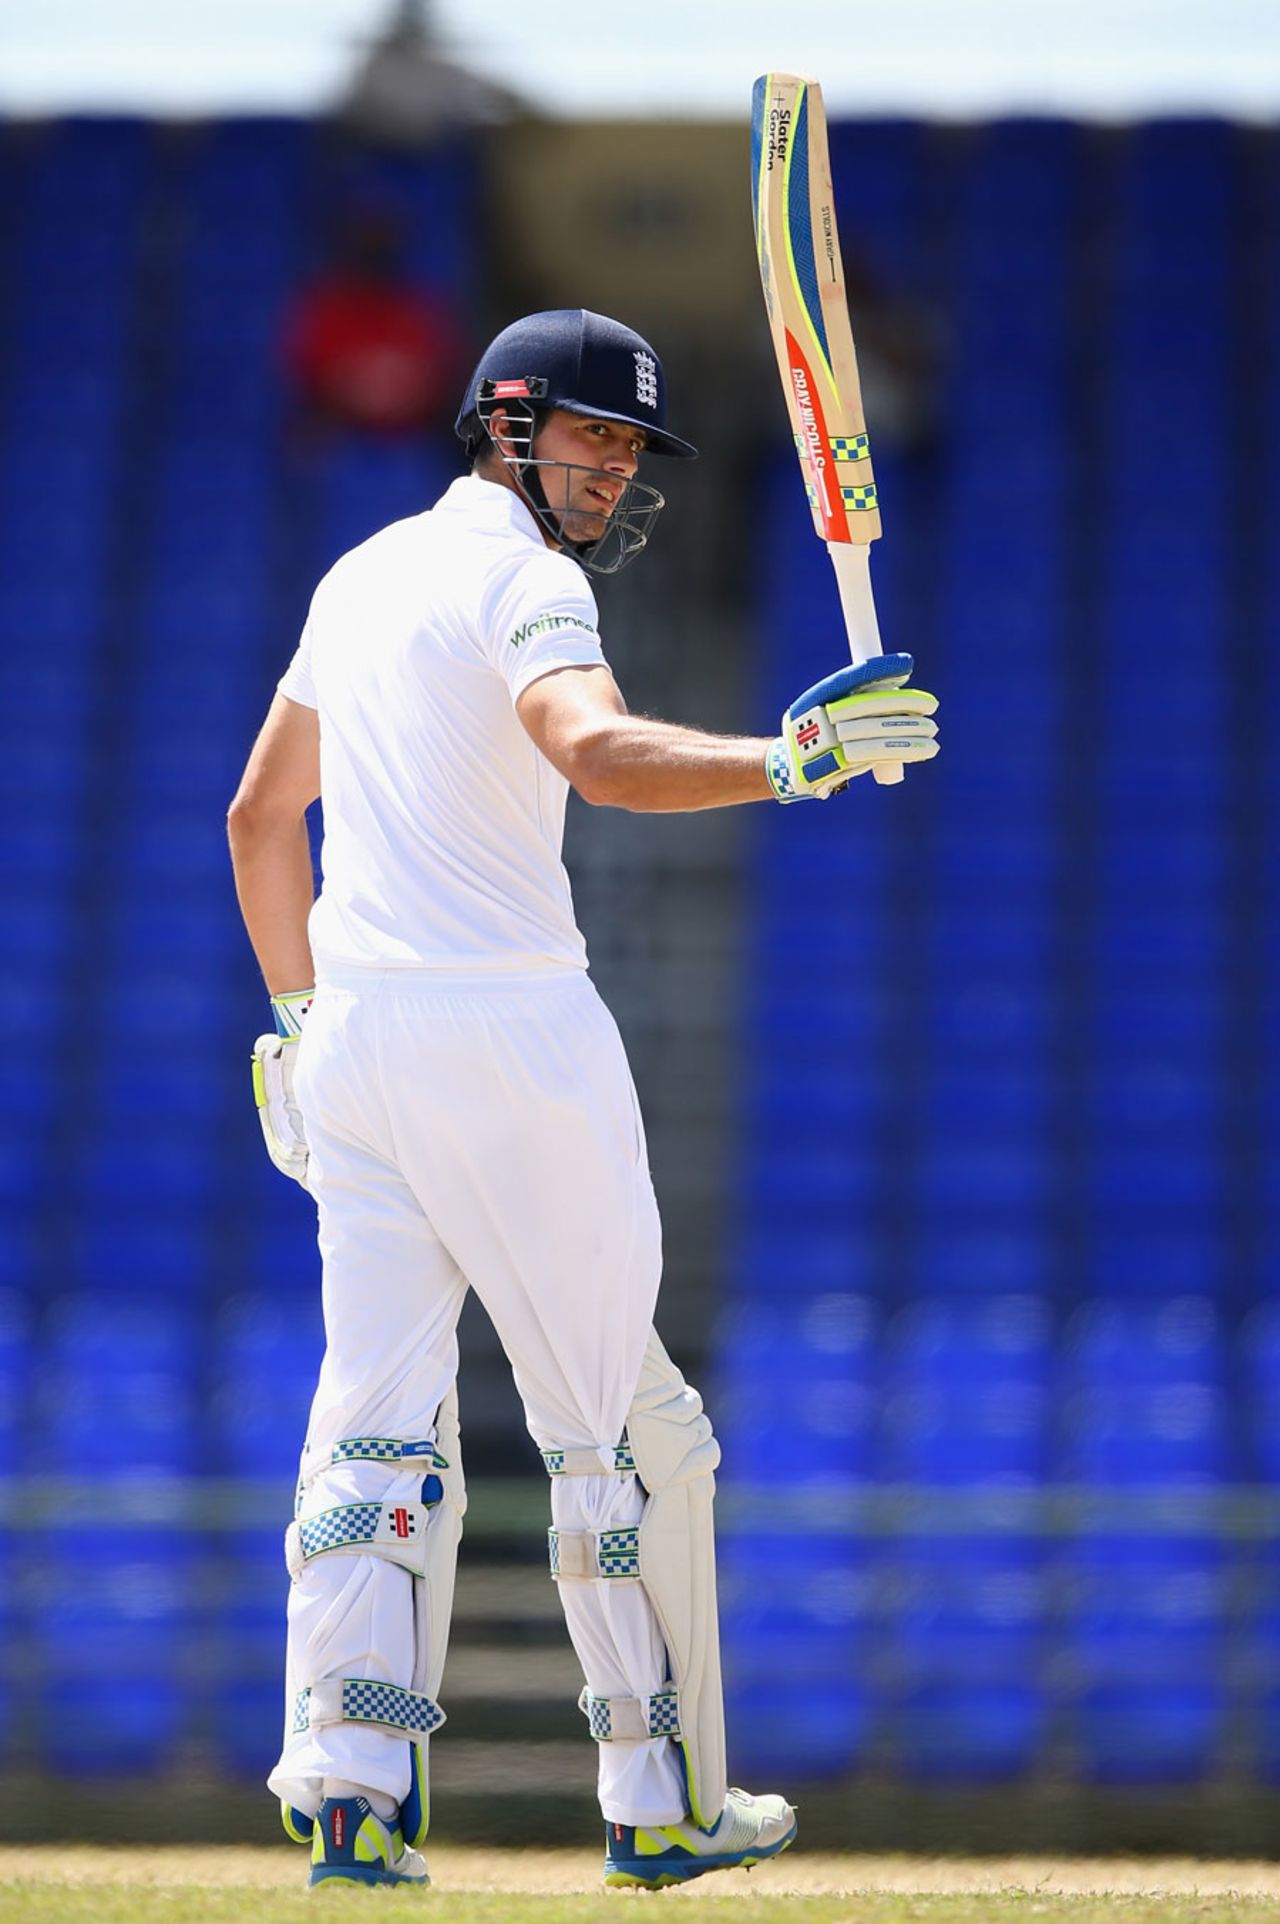 Alastair Cook reached his hundred before retiring, St Kitts Invitiational XI v England XI, Basseterre, 1st day, April 6, 2015